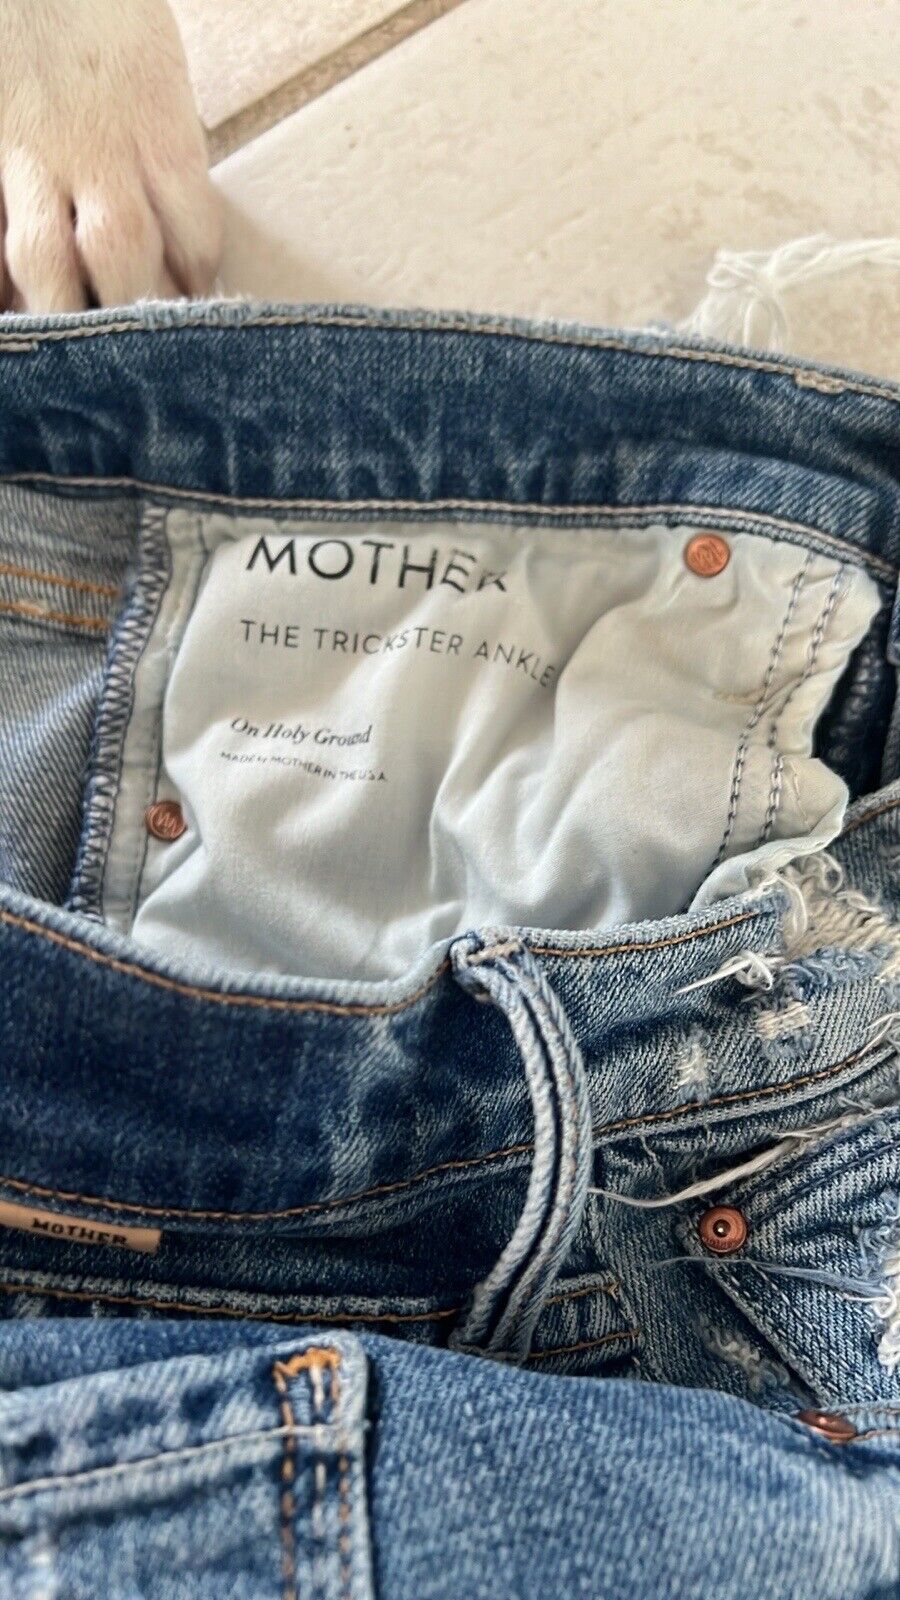 Mother Superior Jeans - The Tomcat Ankle, The Tri… - image 4